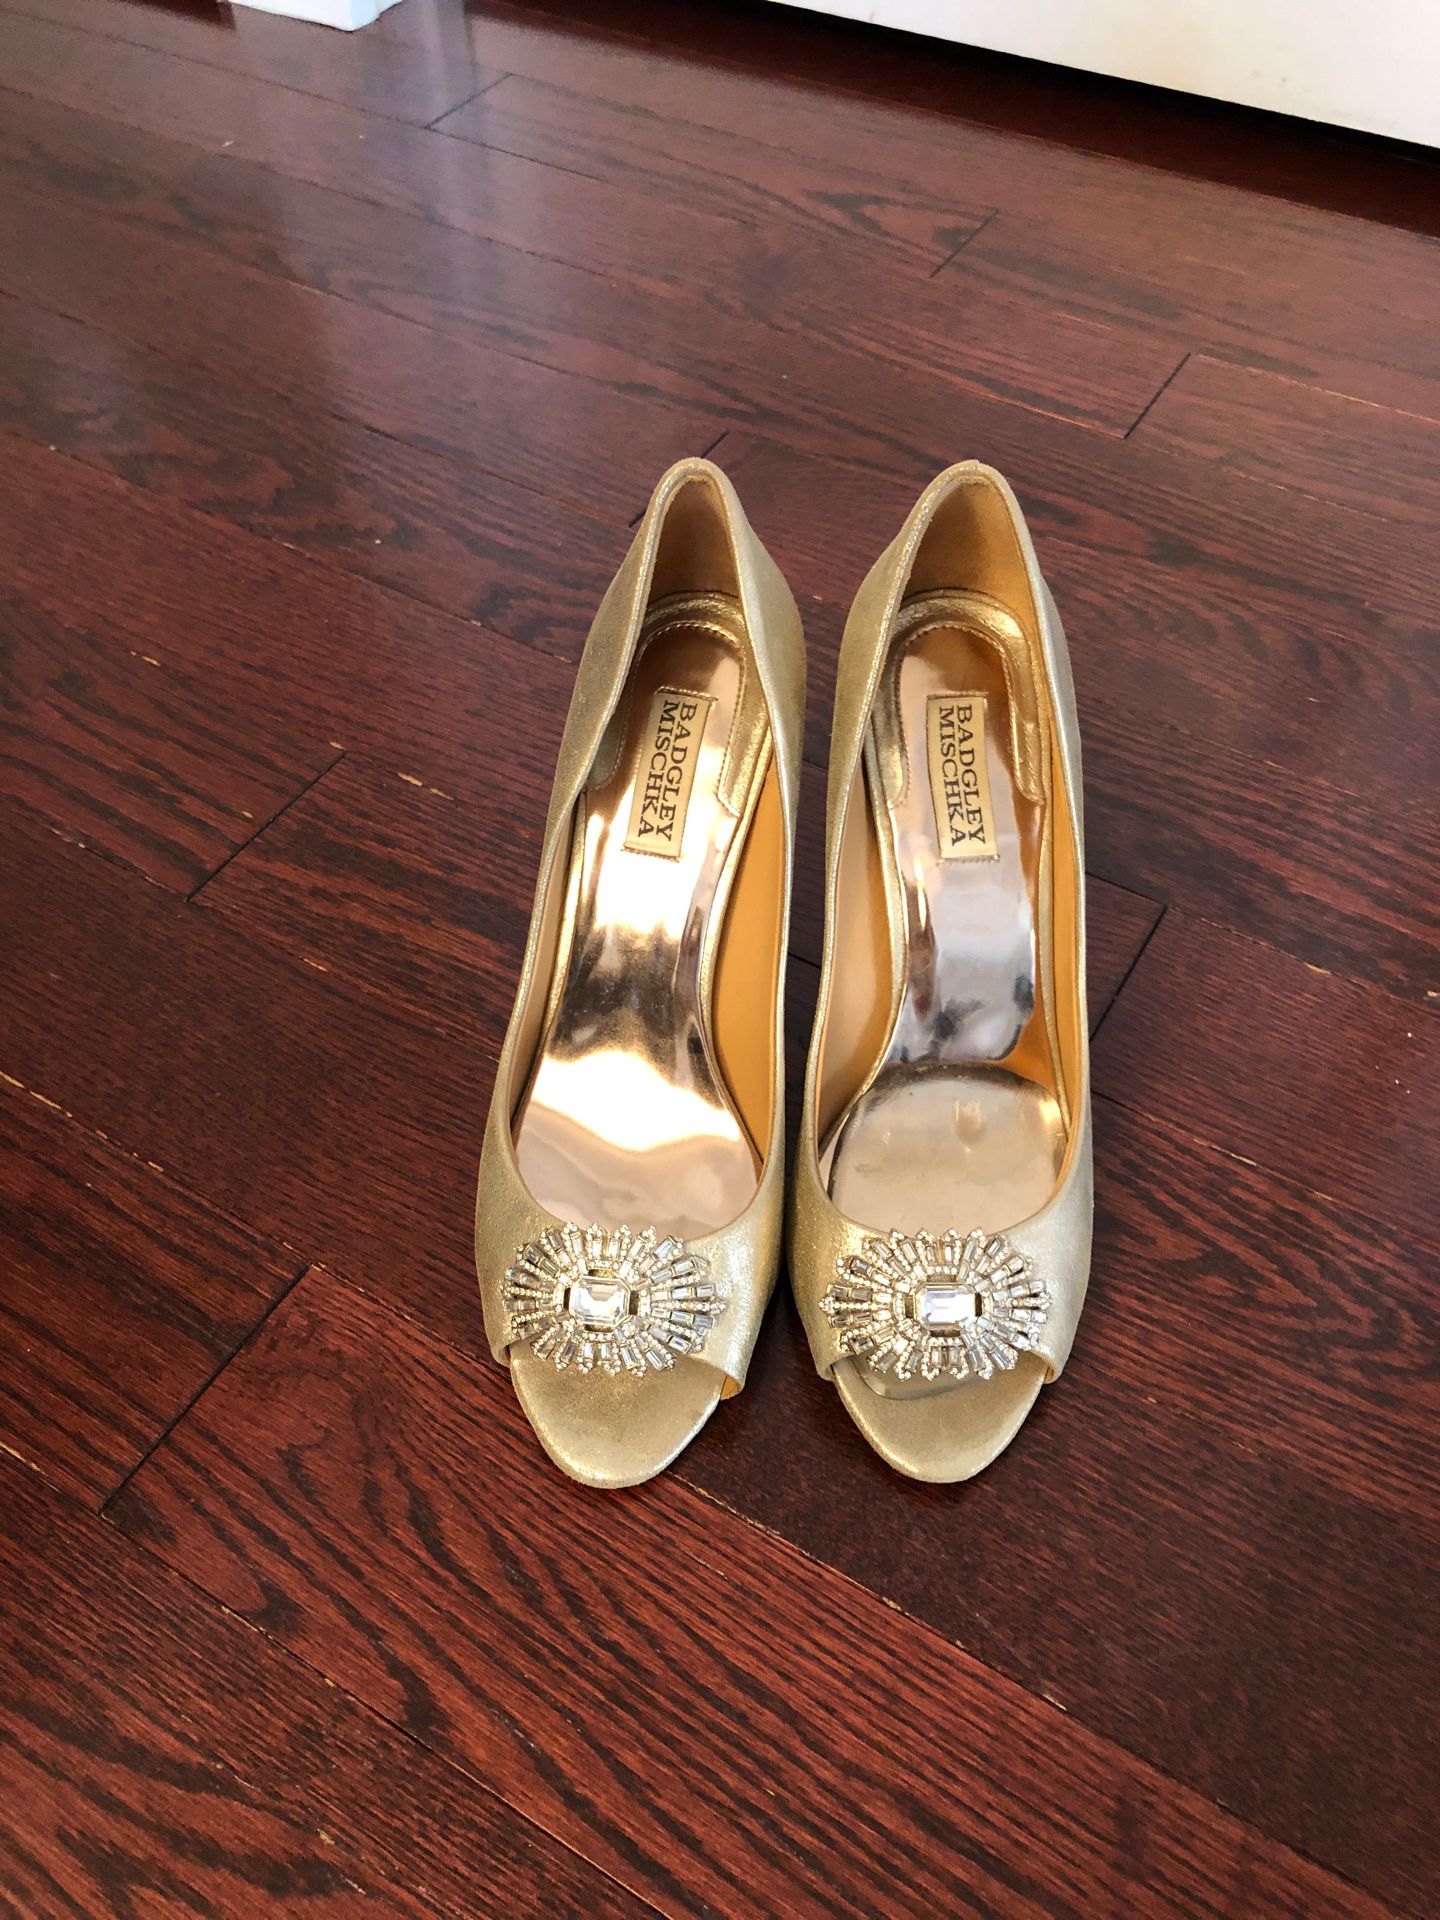 Gold with silver design Badgley Mischka shoes